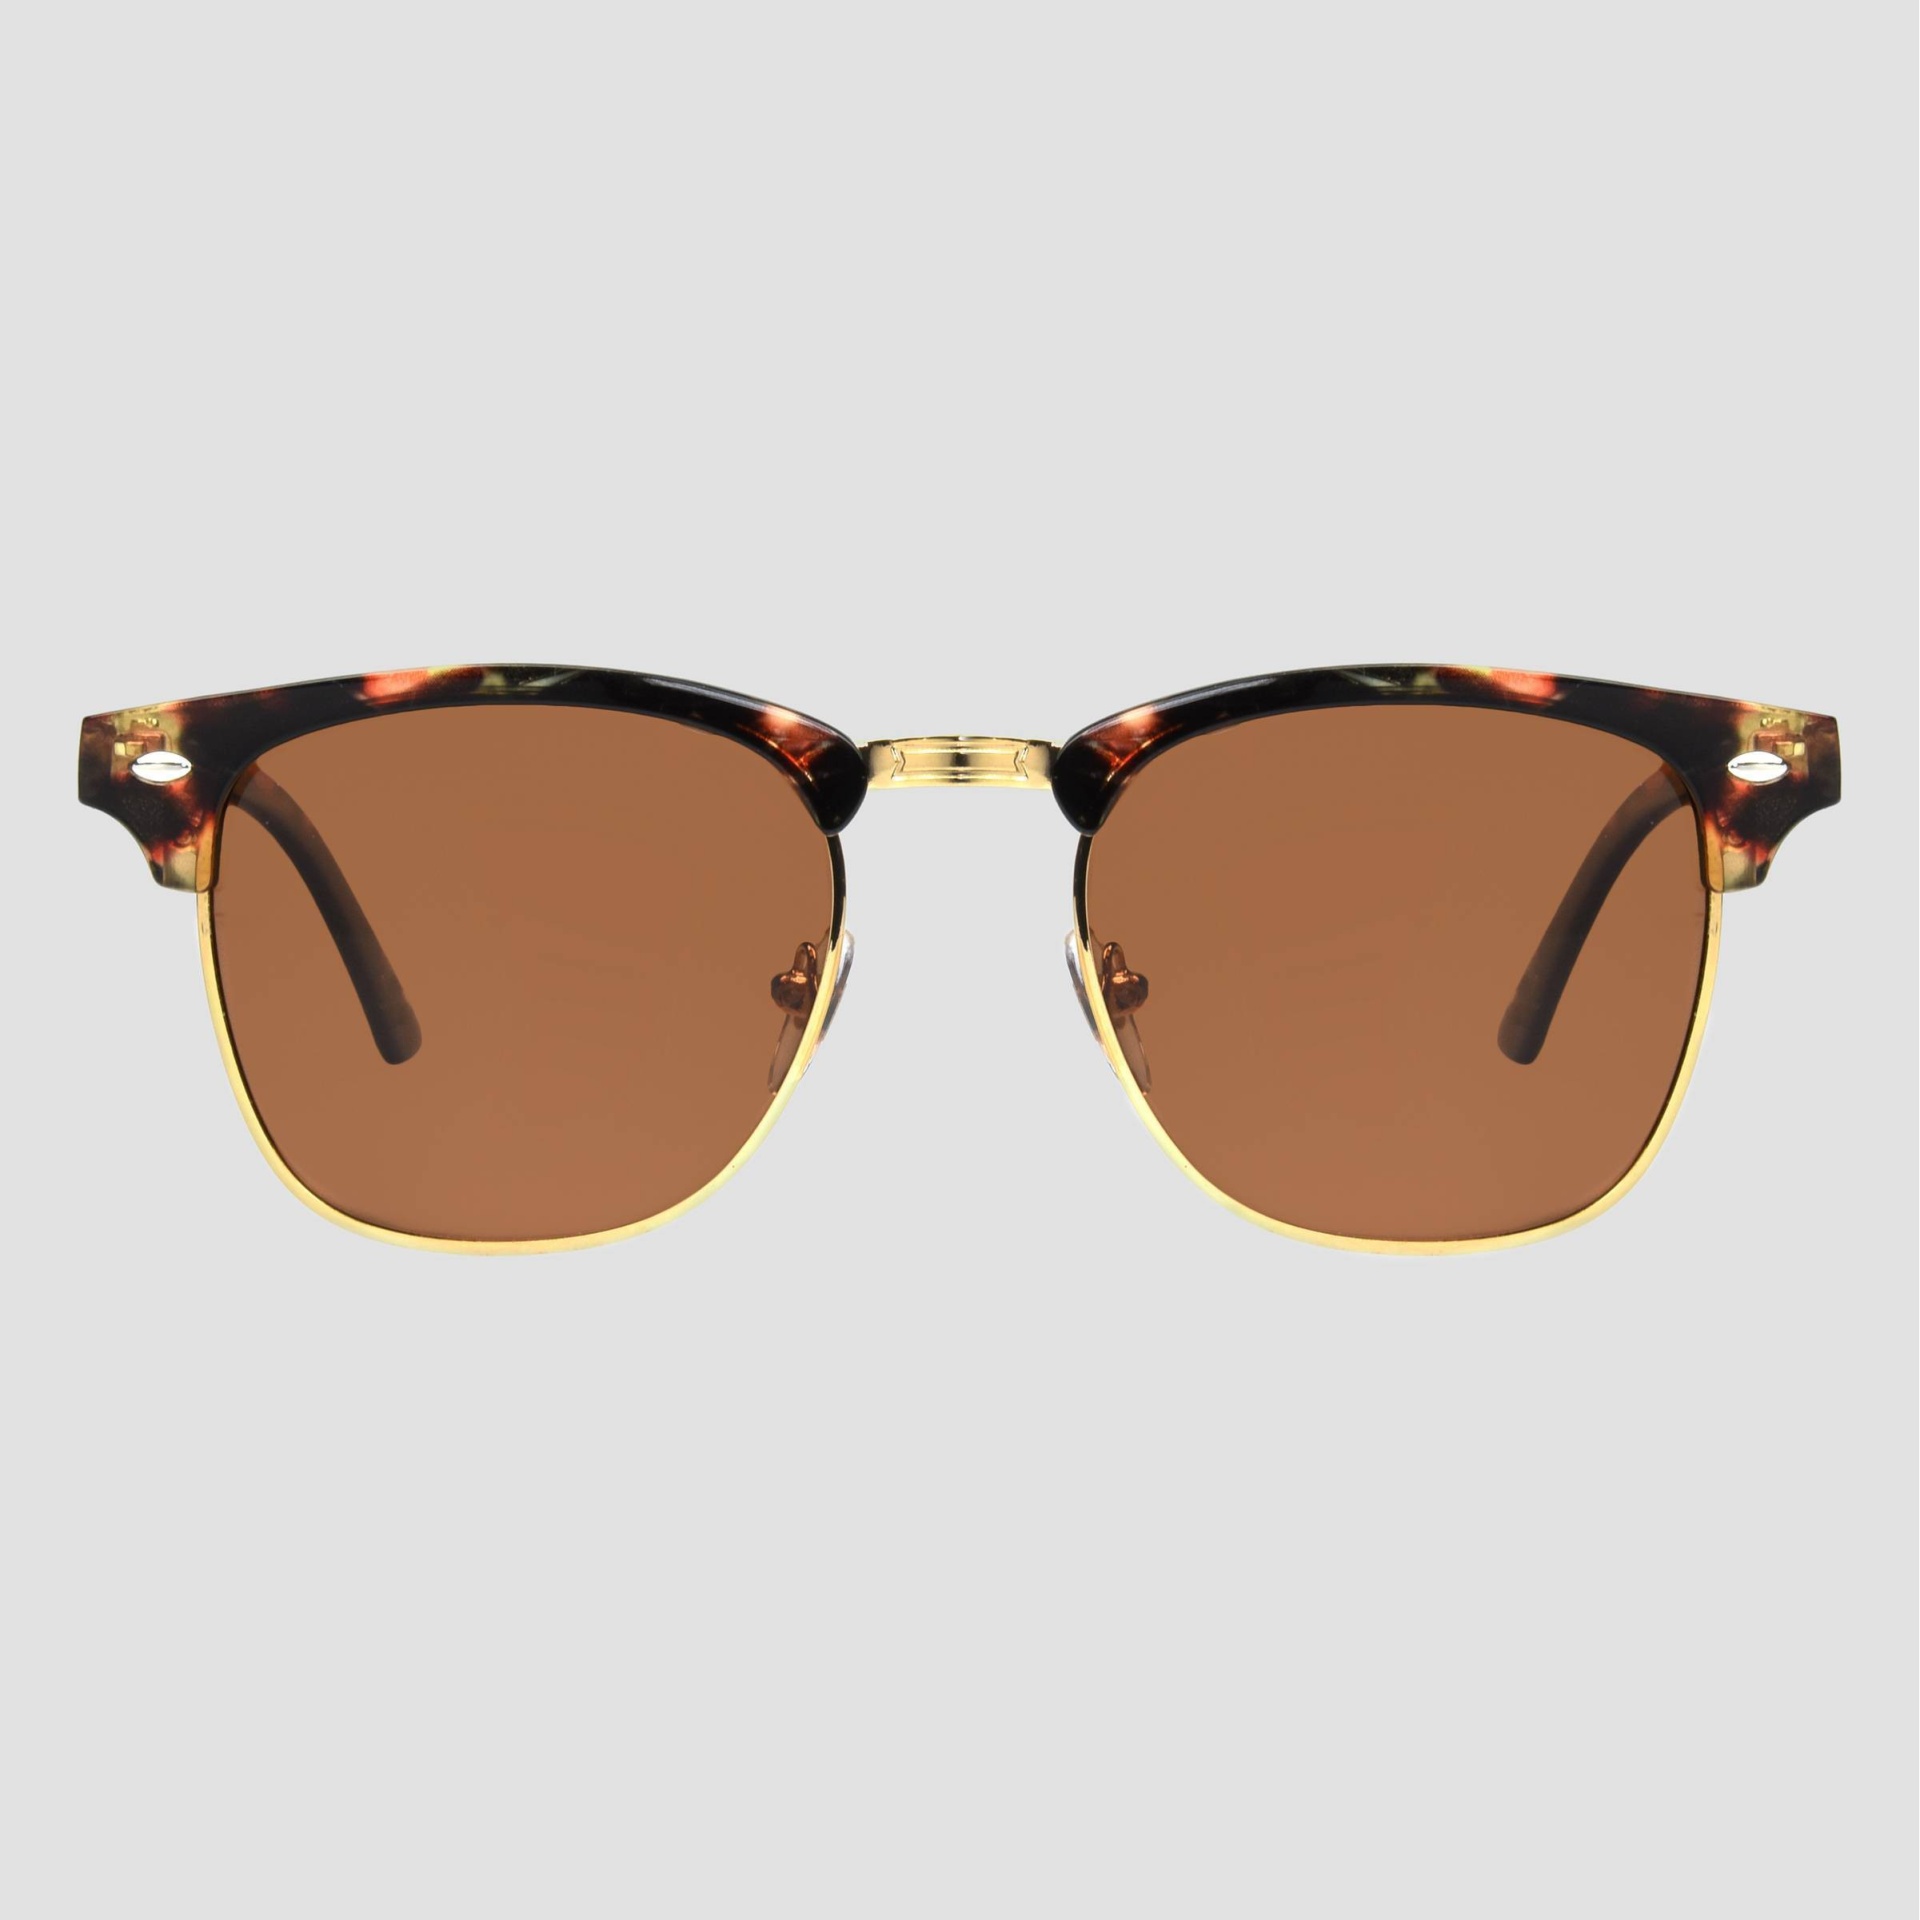 slide 1 of 2, Women's Retro Browline Tortoise Shell Print Sunglasses with Polarized Lenses - A New Day Brown, 1 ct